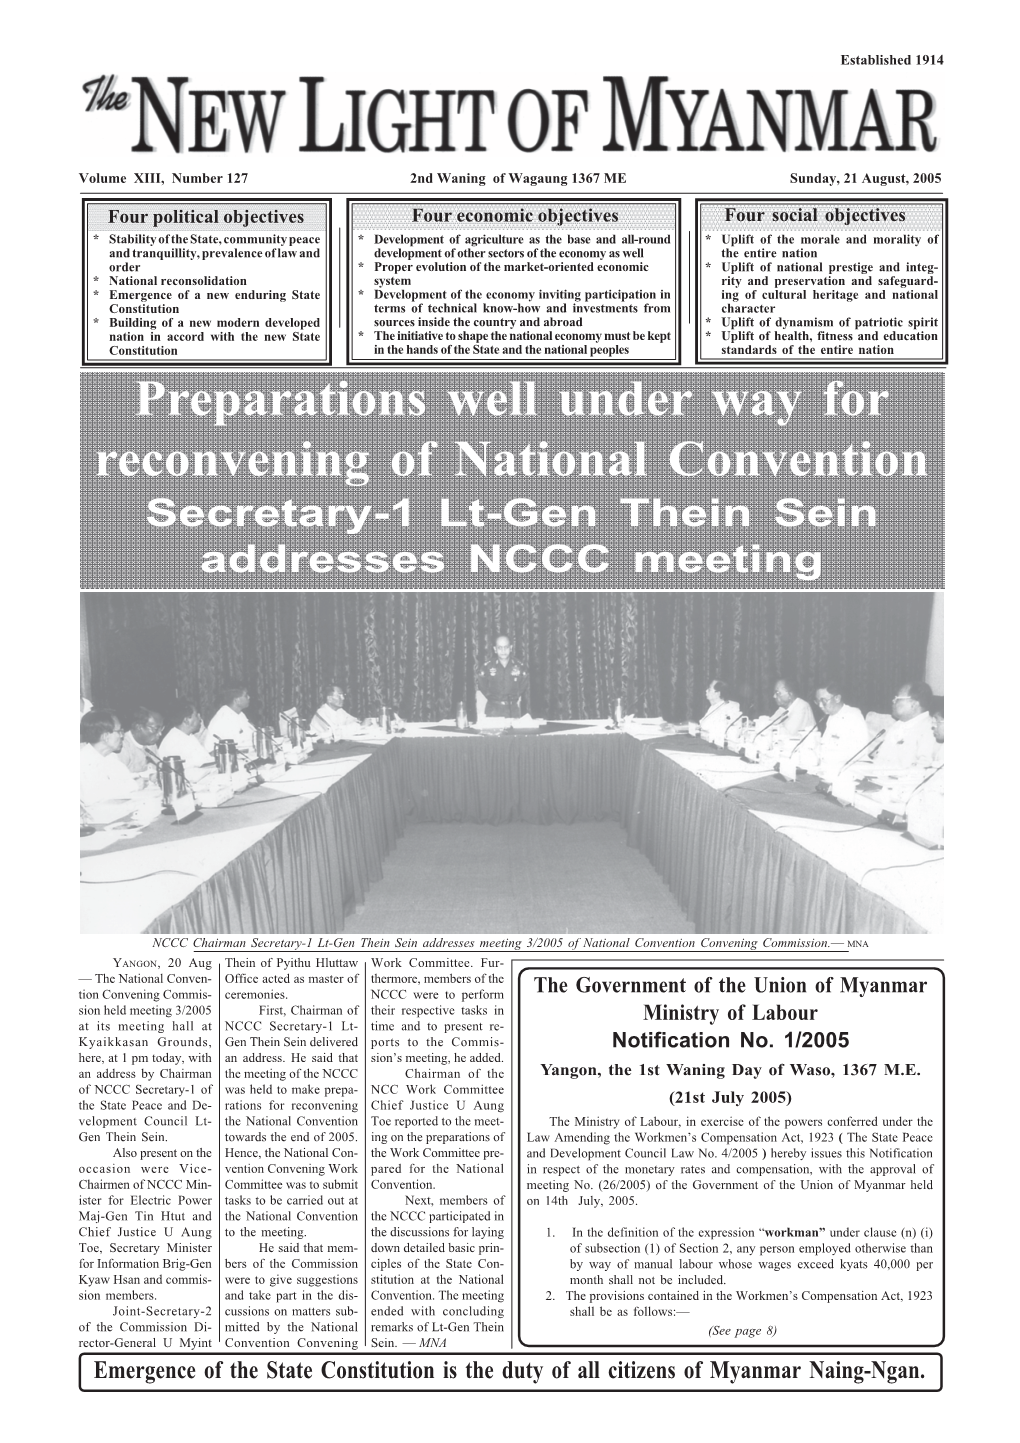 Preparations Well Under Way for Reconvening of National Convention Secretary-1 Lt-Gen Thein Sein Addresses NCCC Meeting